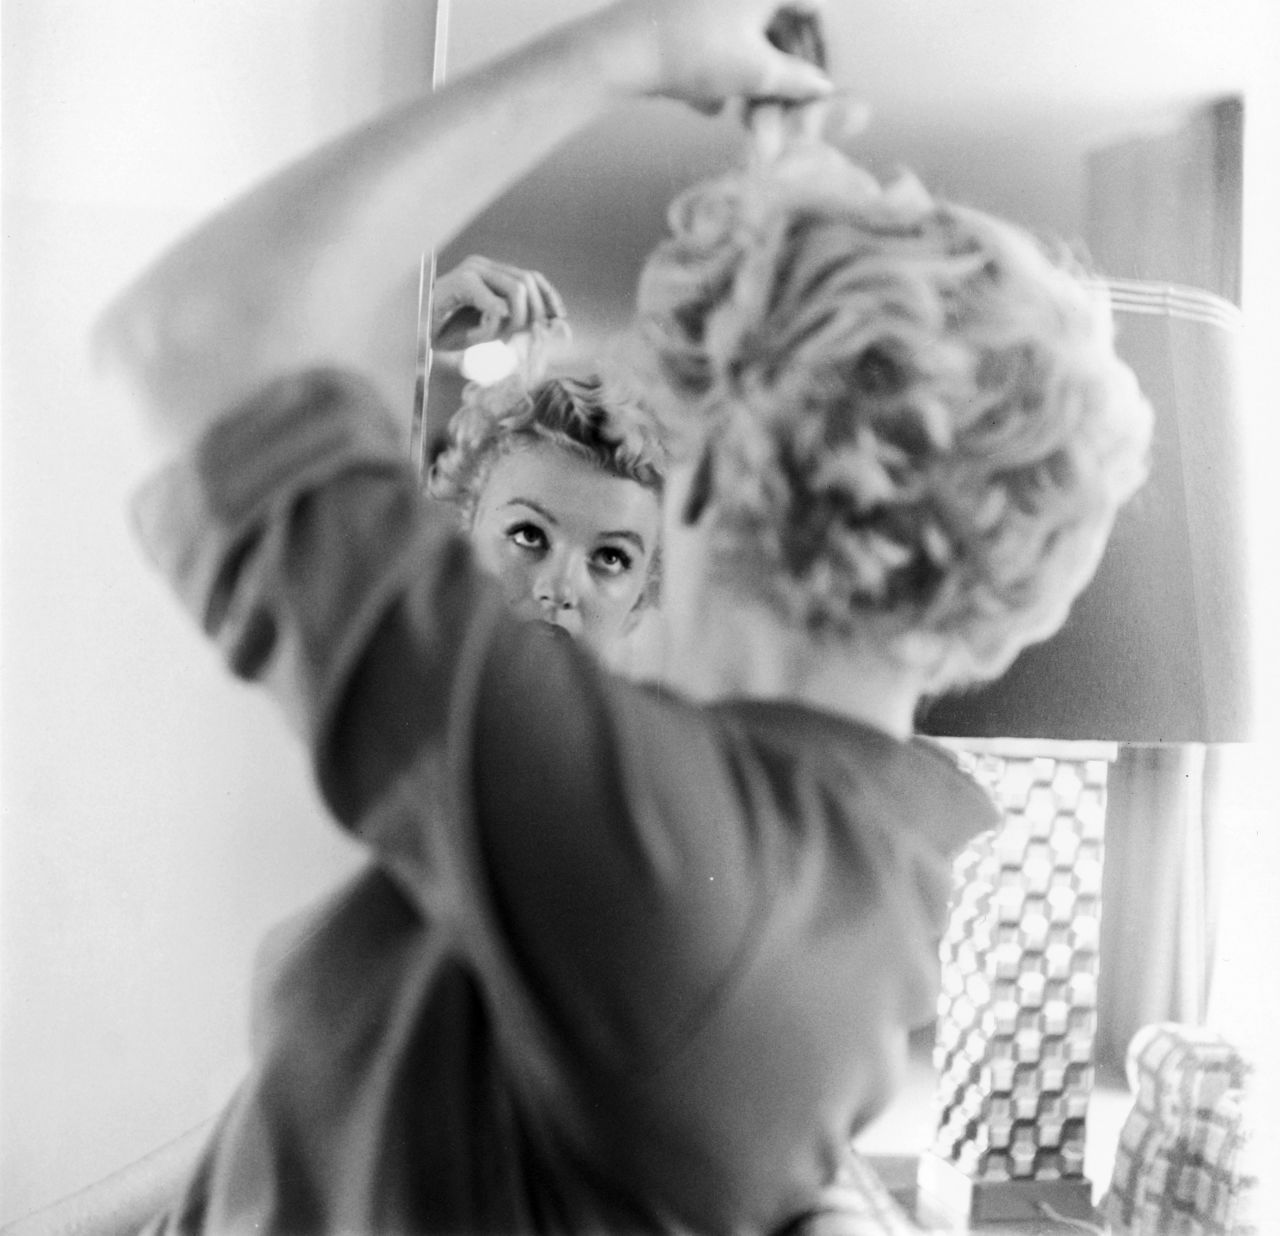 Monroe fixes her hair in front of a mirror in 1951. That year she had several supporting roles in comedies, including "As Young as You Feel," "Love Nest" and "Let's Make It Legal."<br /><br />"If you happen to have blonde hair, you're considered dumb. I don't know why that is. It's very -- I think it's a very limited view," Monroe said at the time.